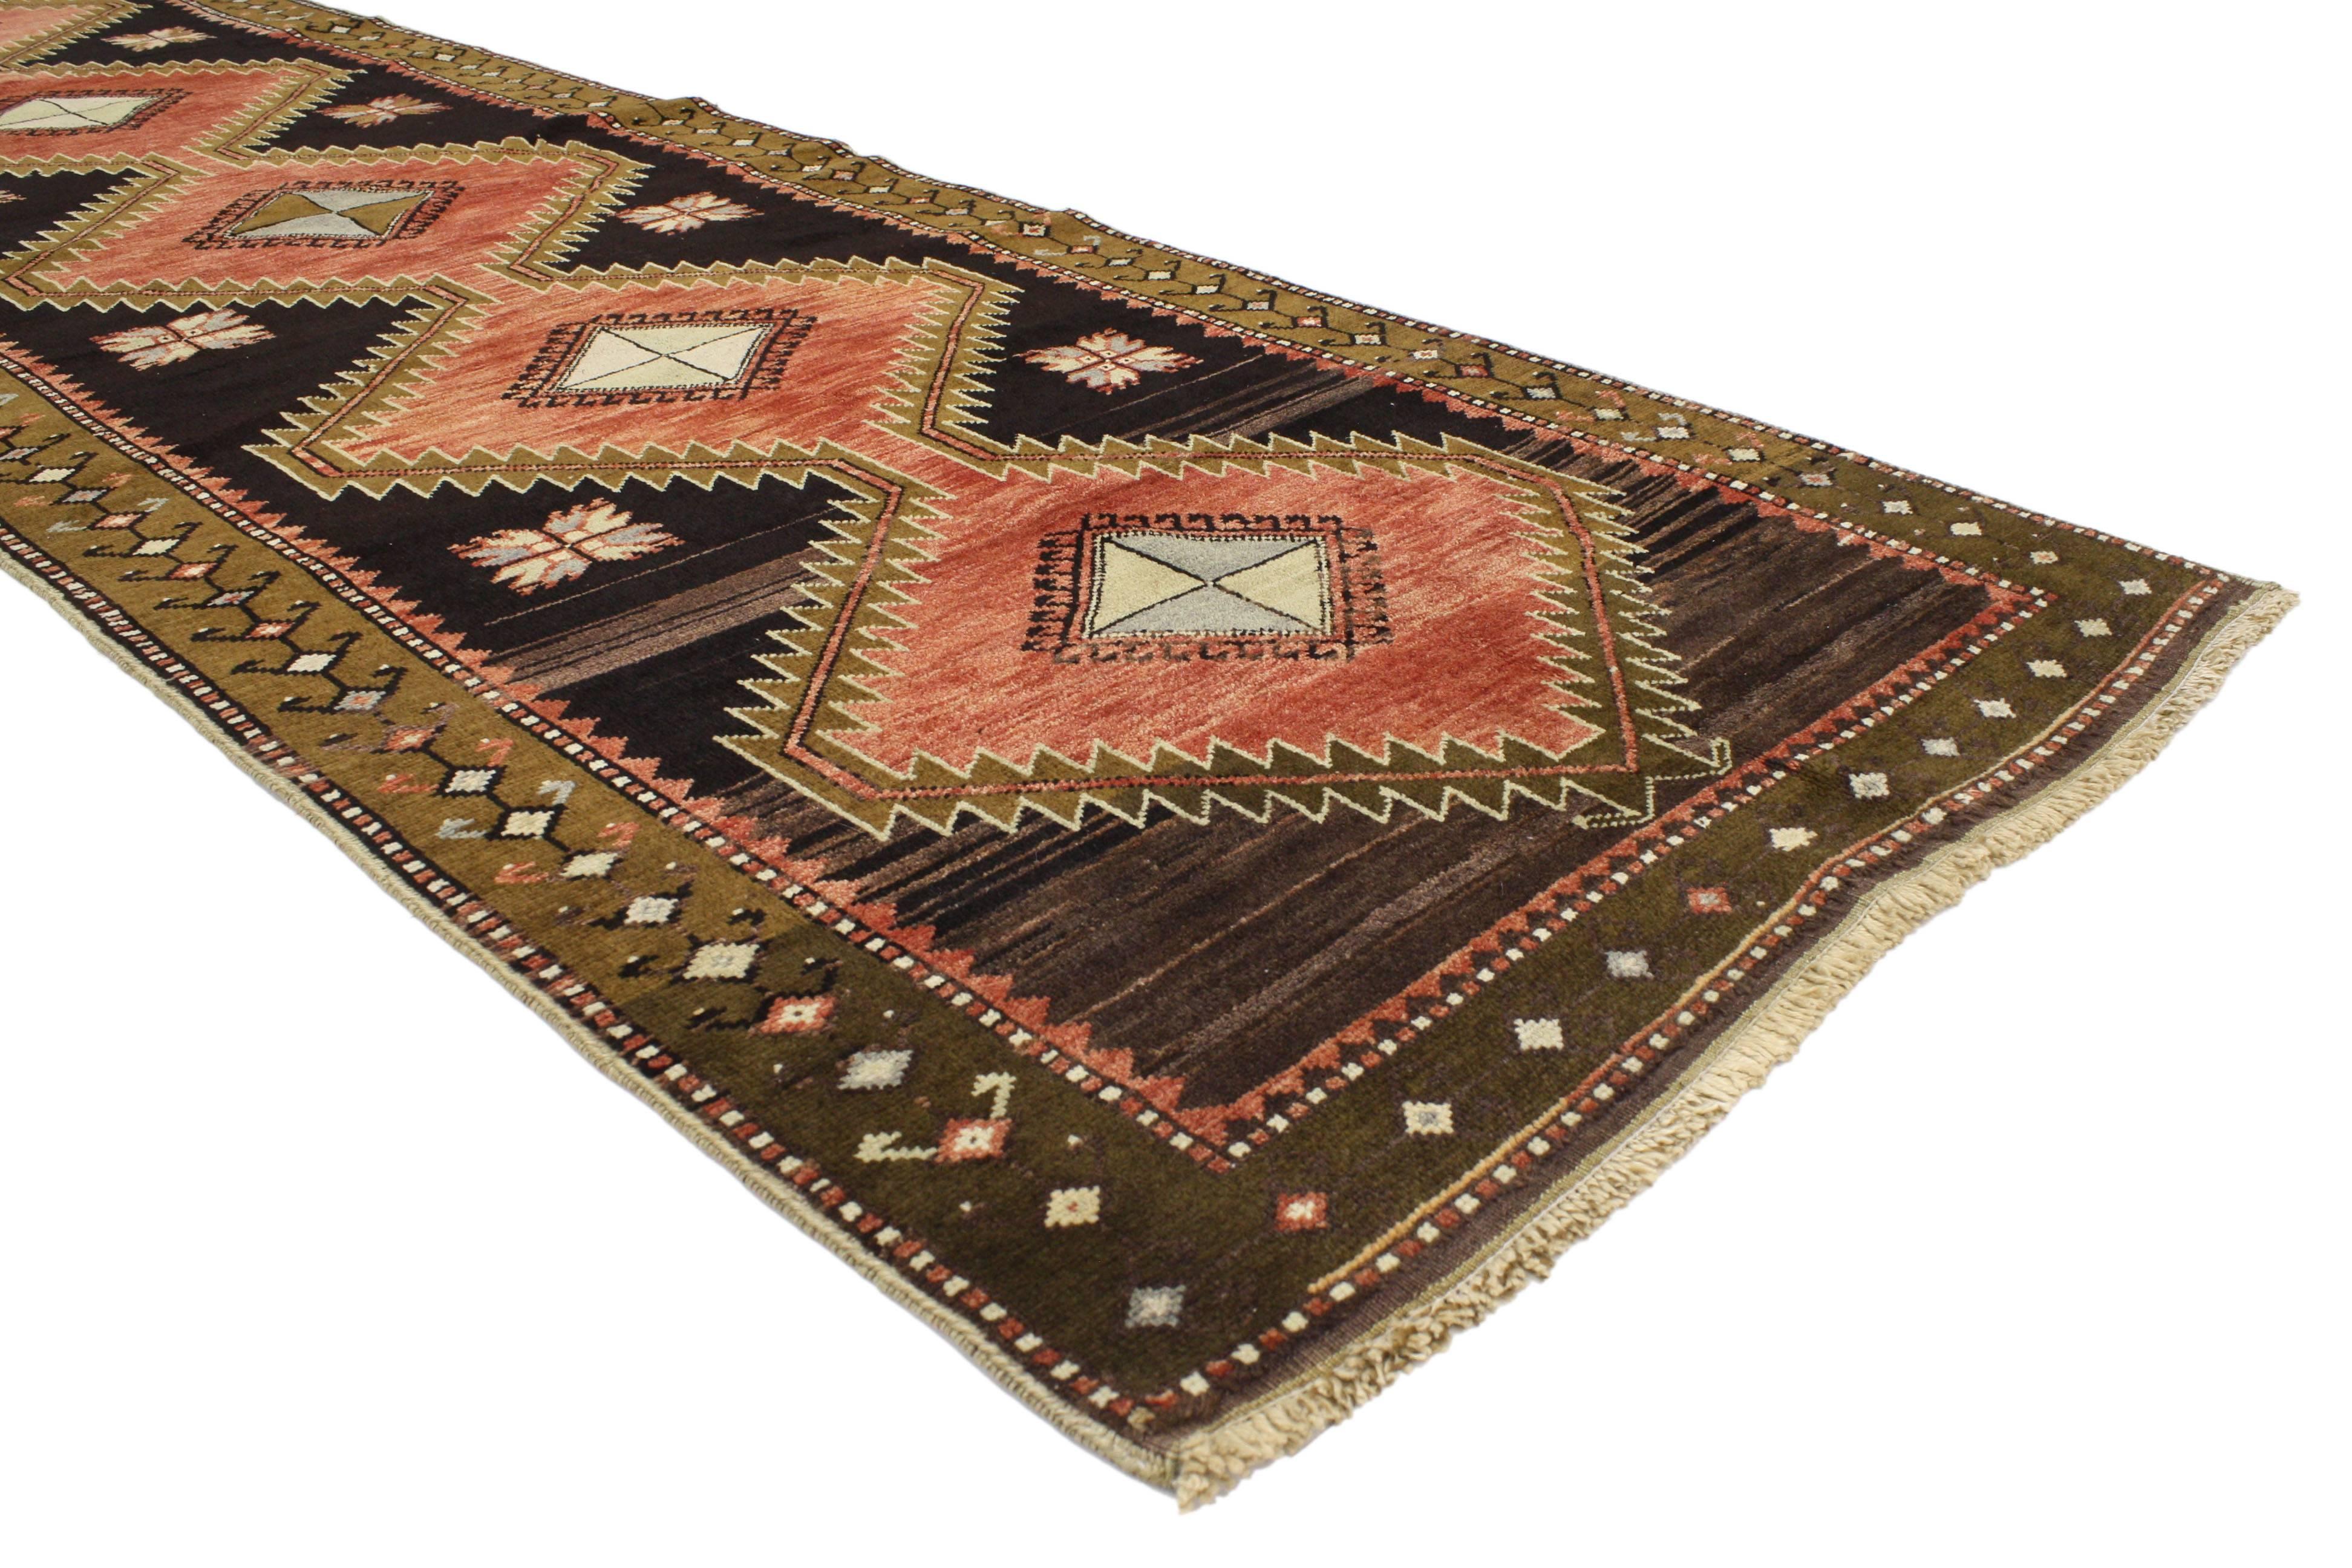 This hand-knotted wool vintage Turkish Oushak runner with Modern Tribal Style features two large hexagonal medallions with Turkish motifs in an abrashed red field surrounded by a small geometric border. Rendered in variegated shades of red, dark